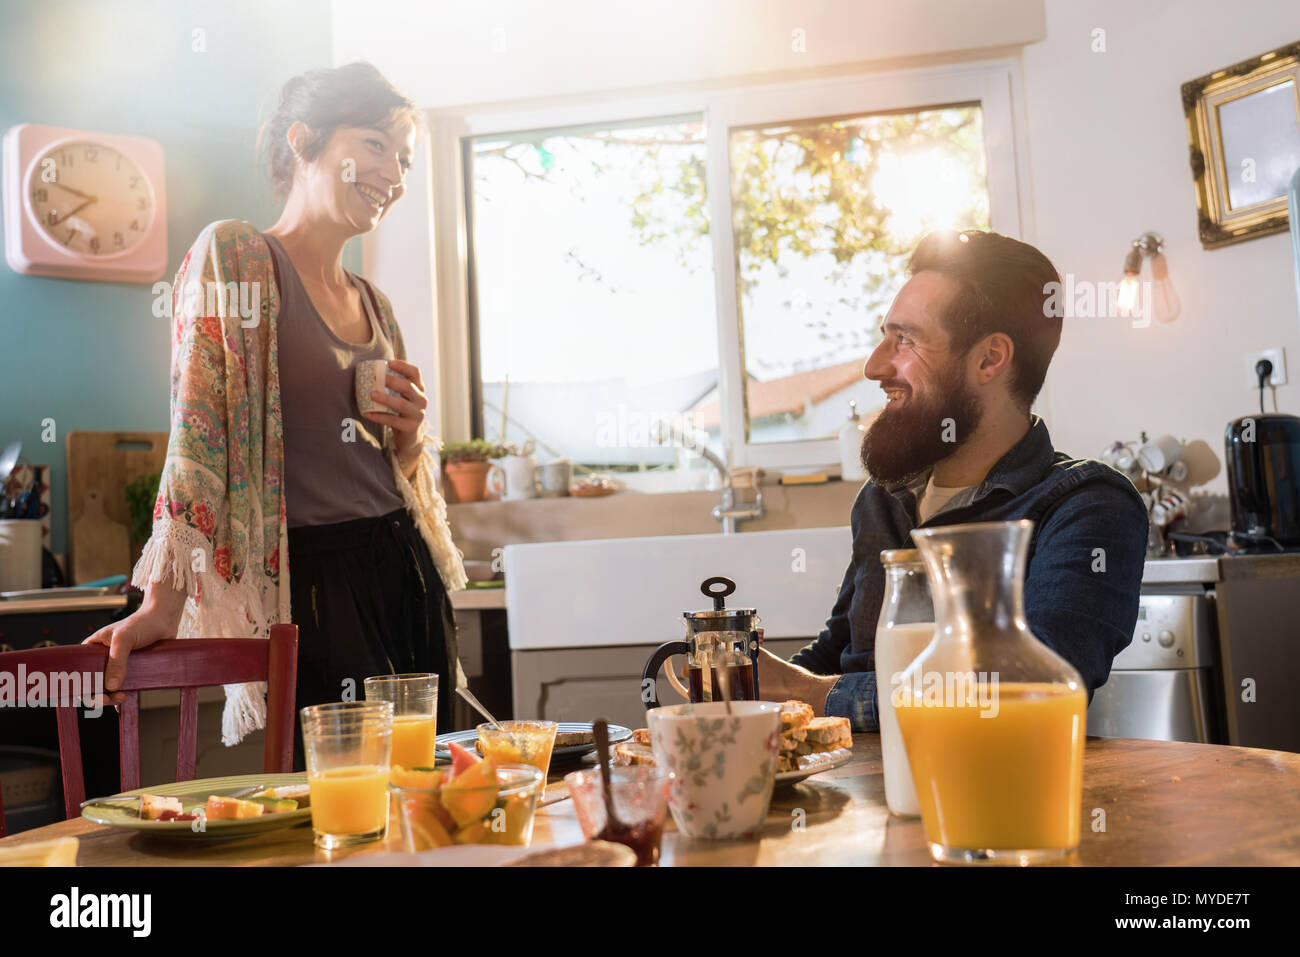 Cheerful couple having breakfast in the kitchen of their house Stock Photo